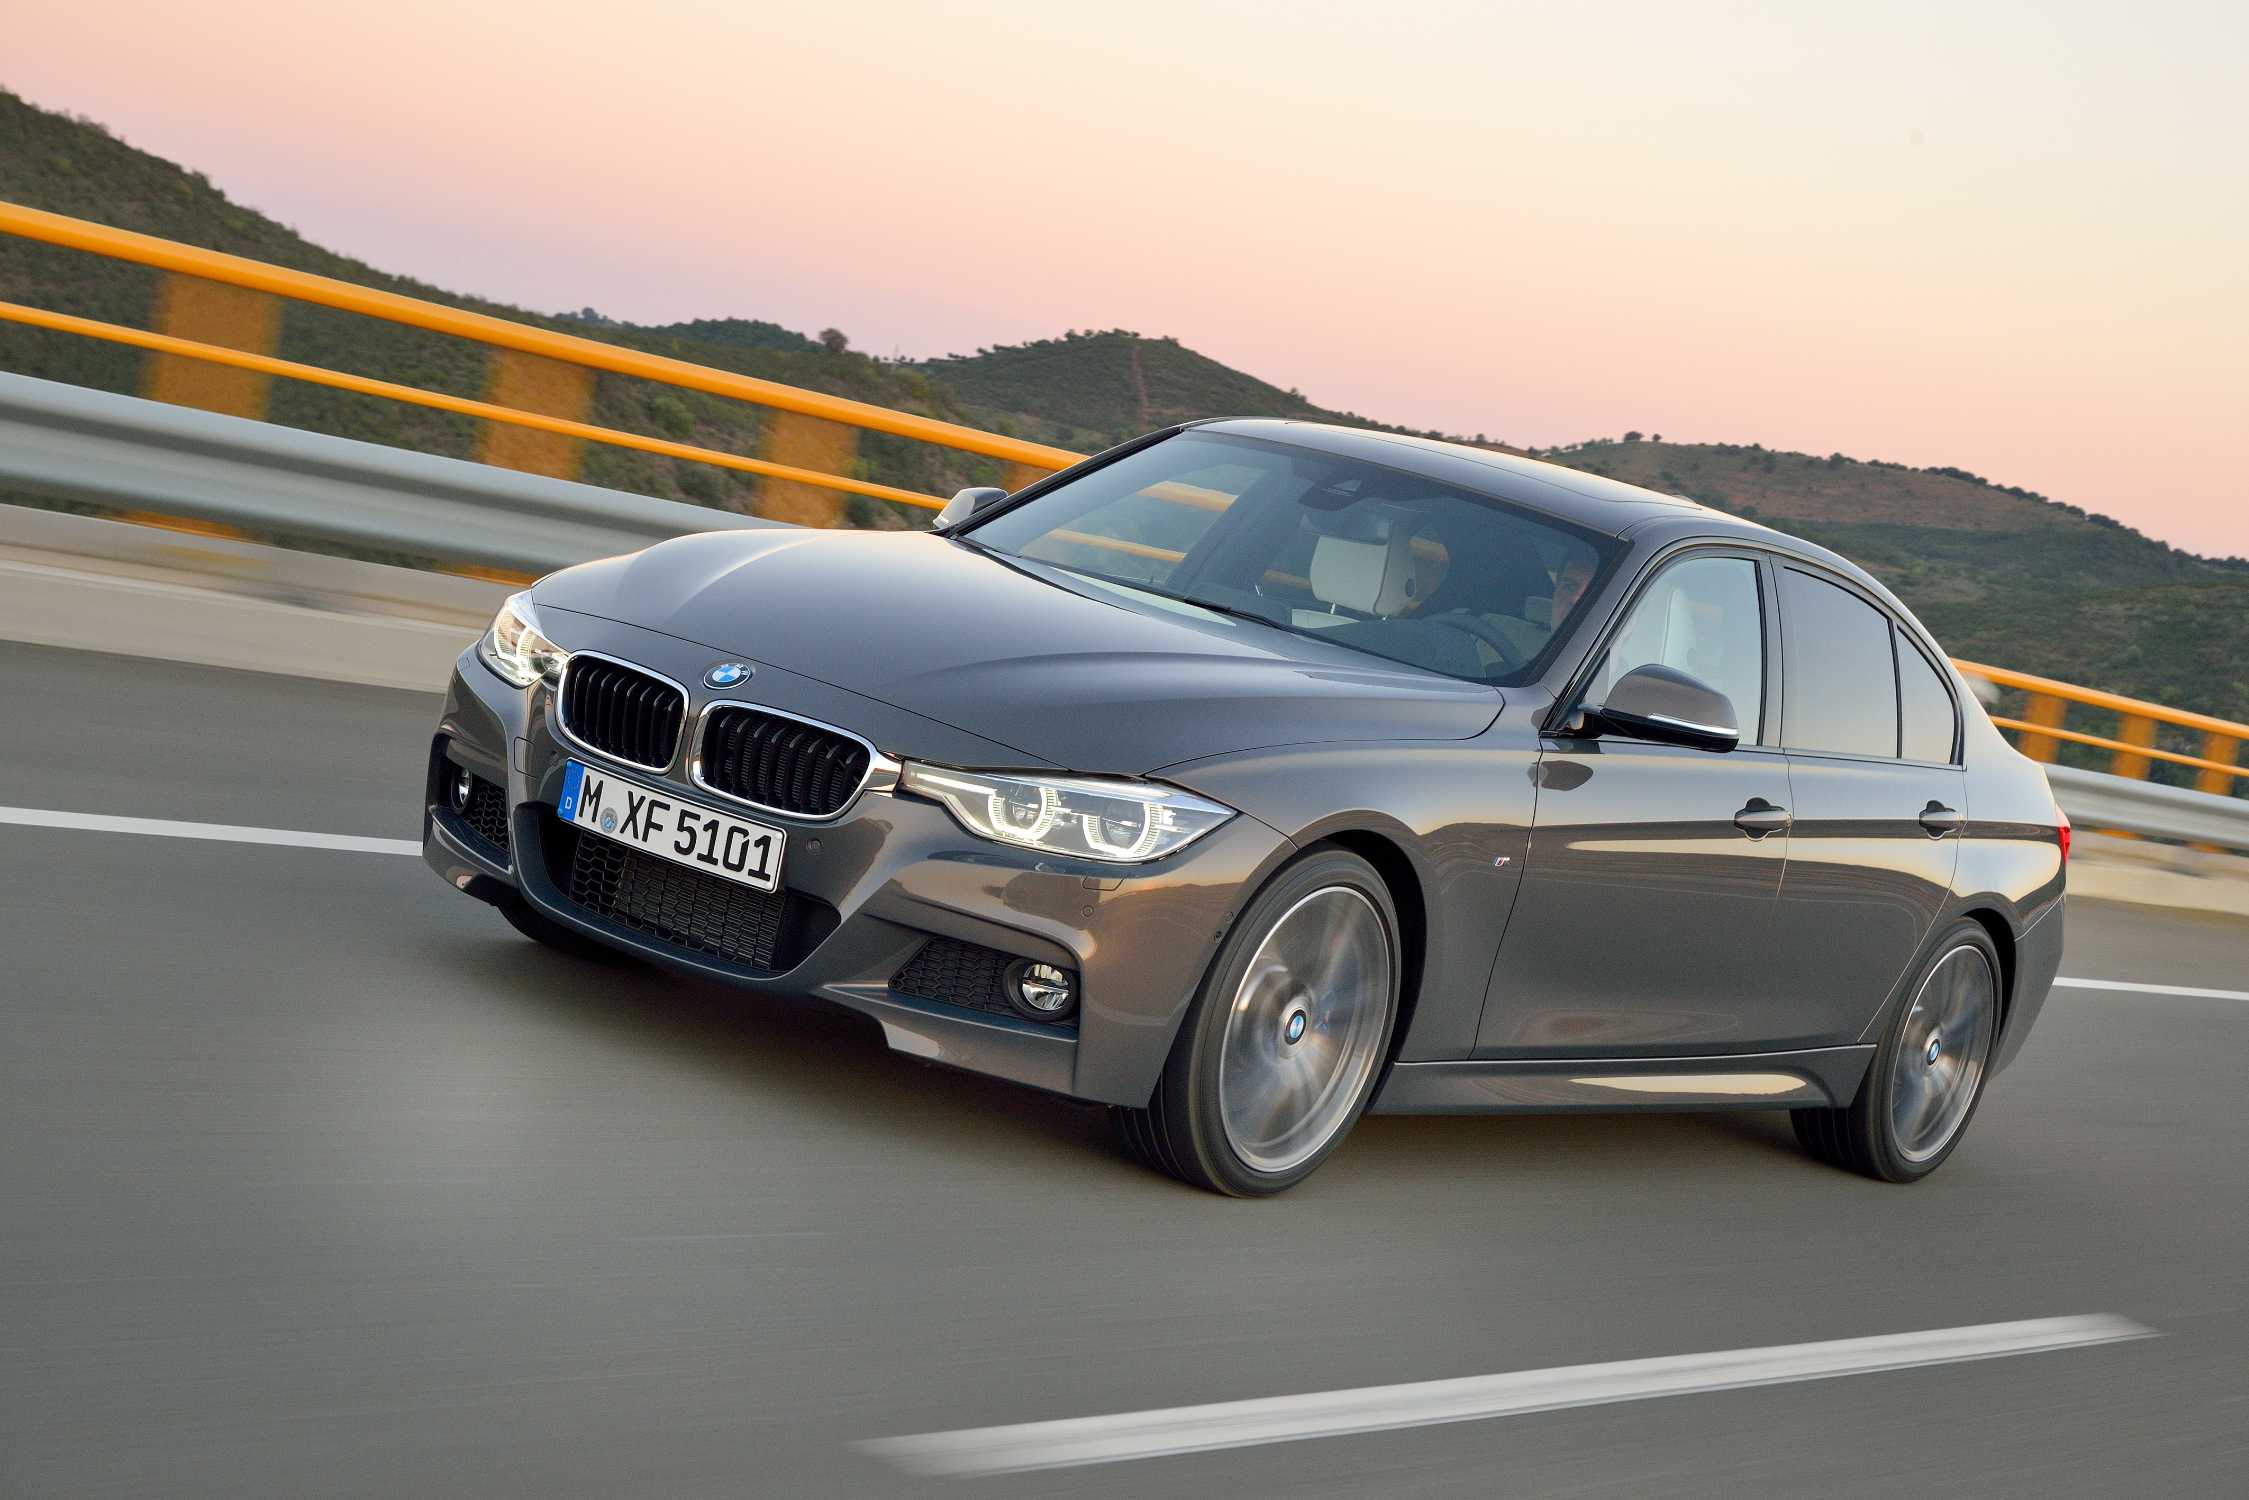 The 2017 BMW 2 Series Coupe and 2017 BMW 3 Series Sedan